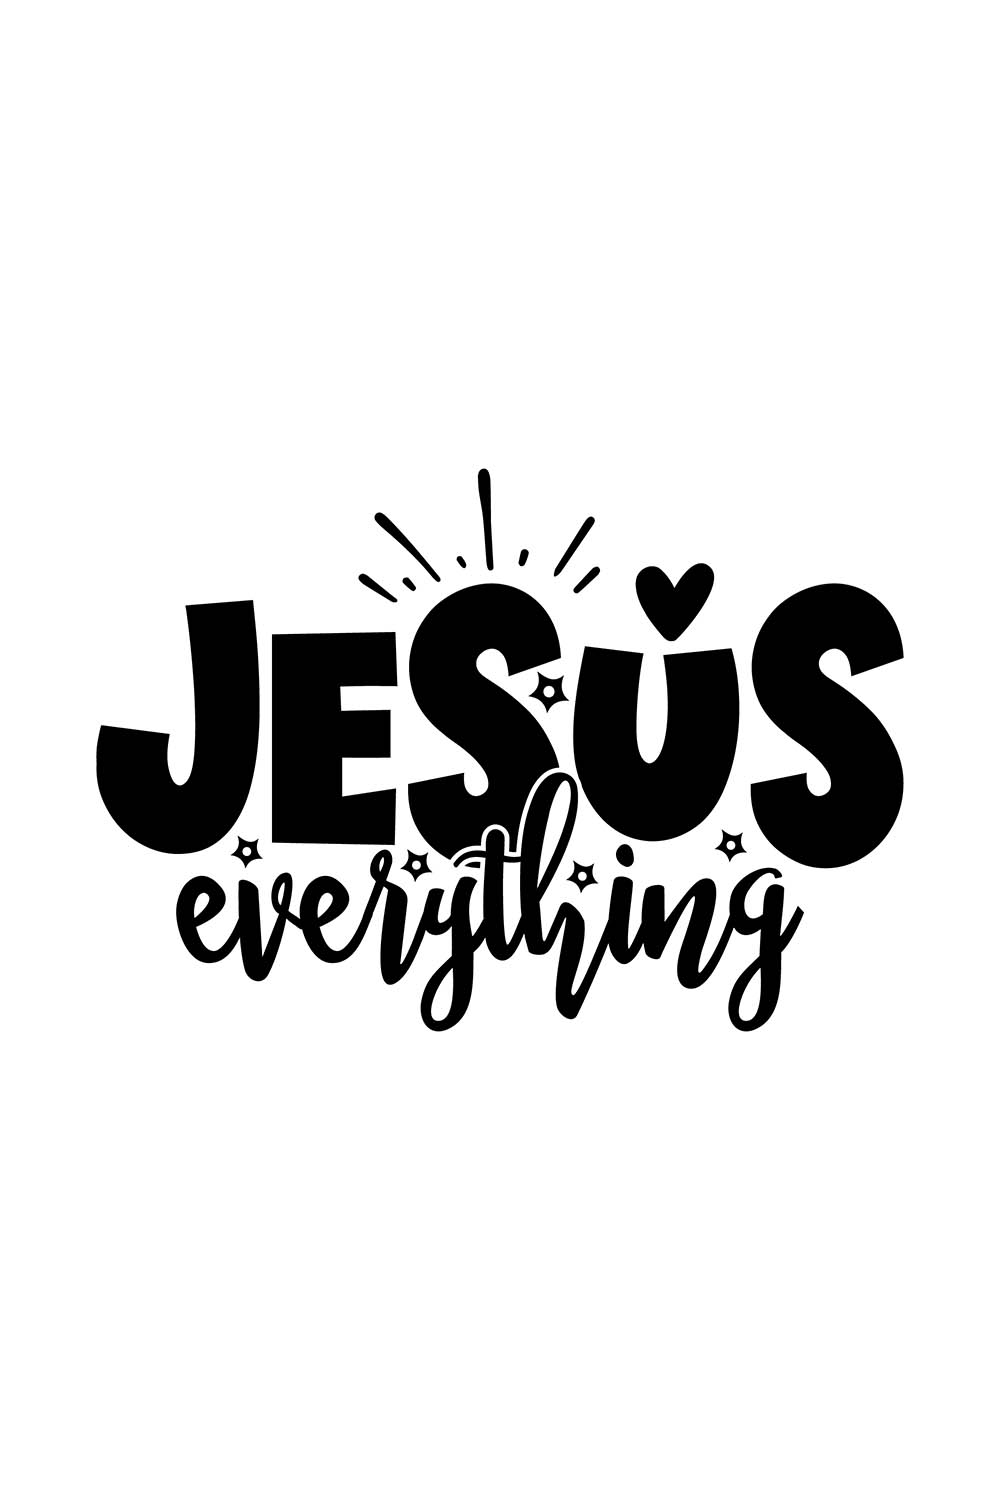 Image with amazing black lettering for Jesus Everything prints.